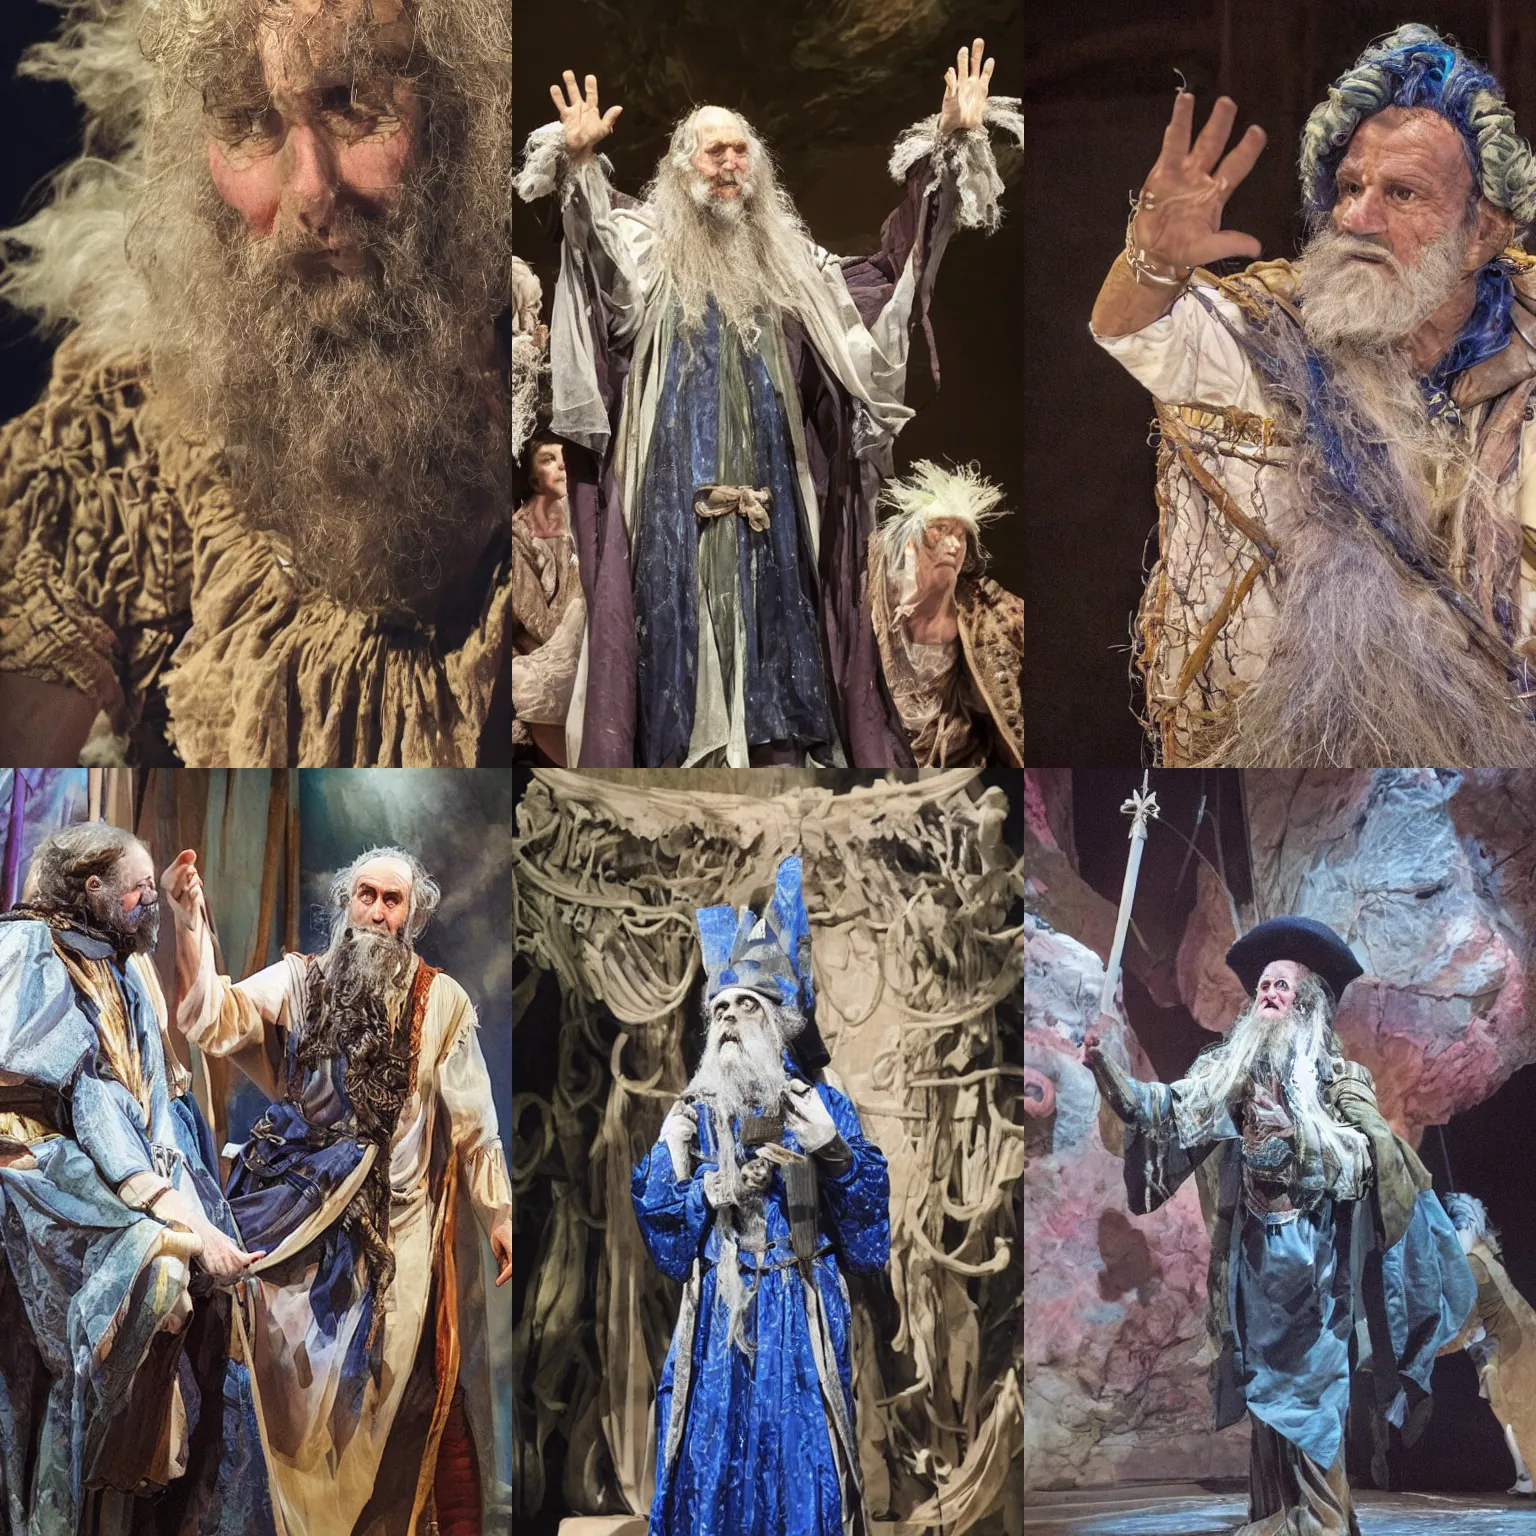 Prompt: a photo of Prospero from the stage production of The Tempest